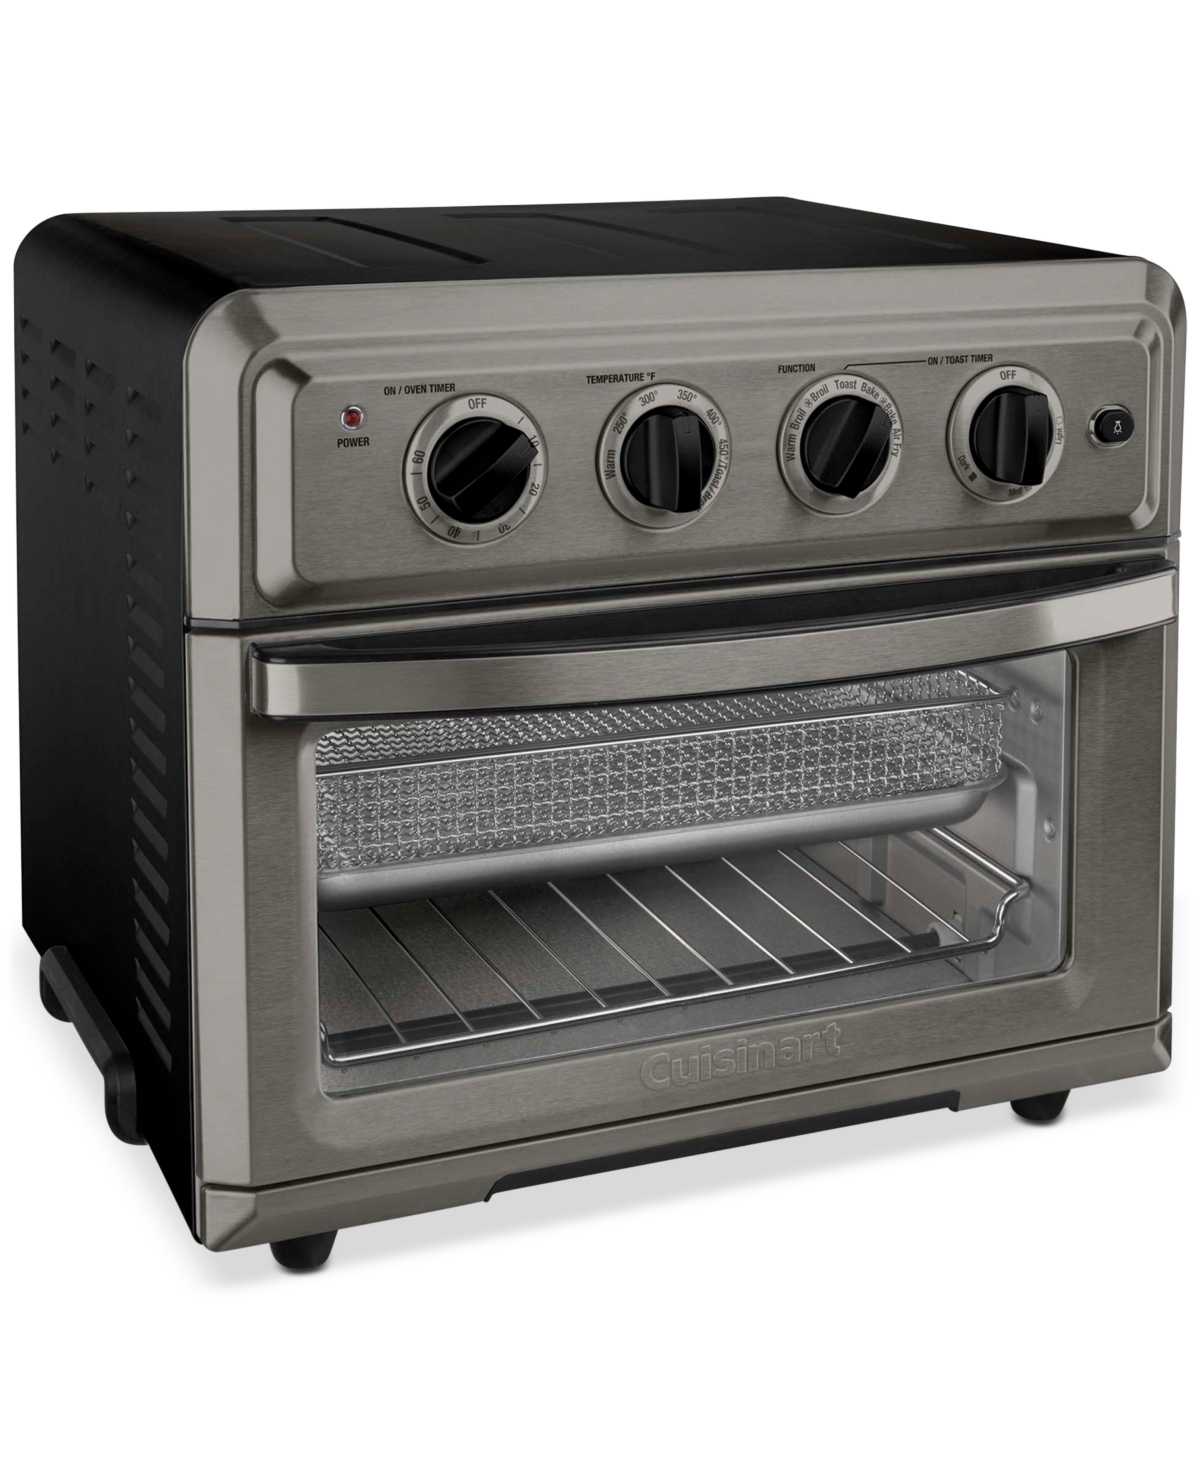 UPC 086279162472 product image for Cuisinart Toa-60BKS Air Fryer Toaster Oven | upcitemdb.com